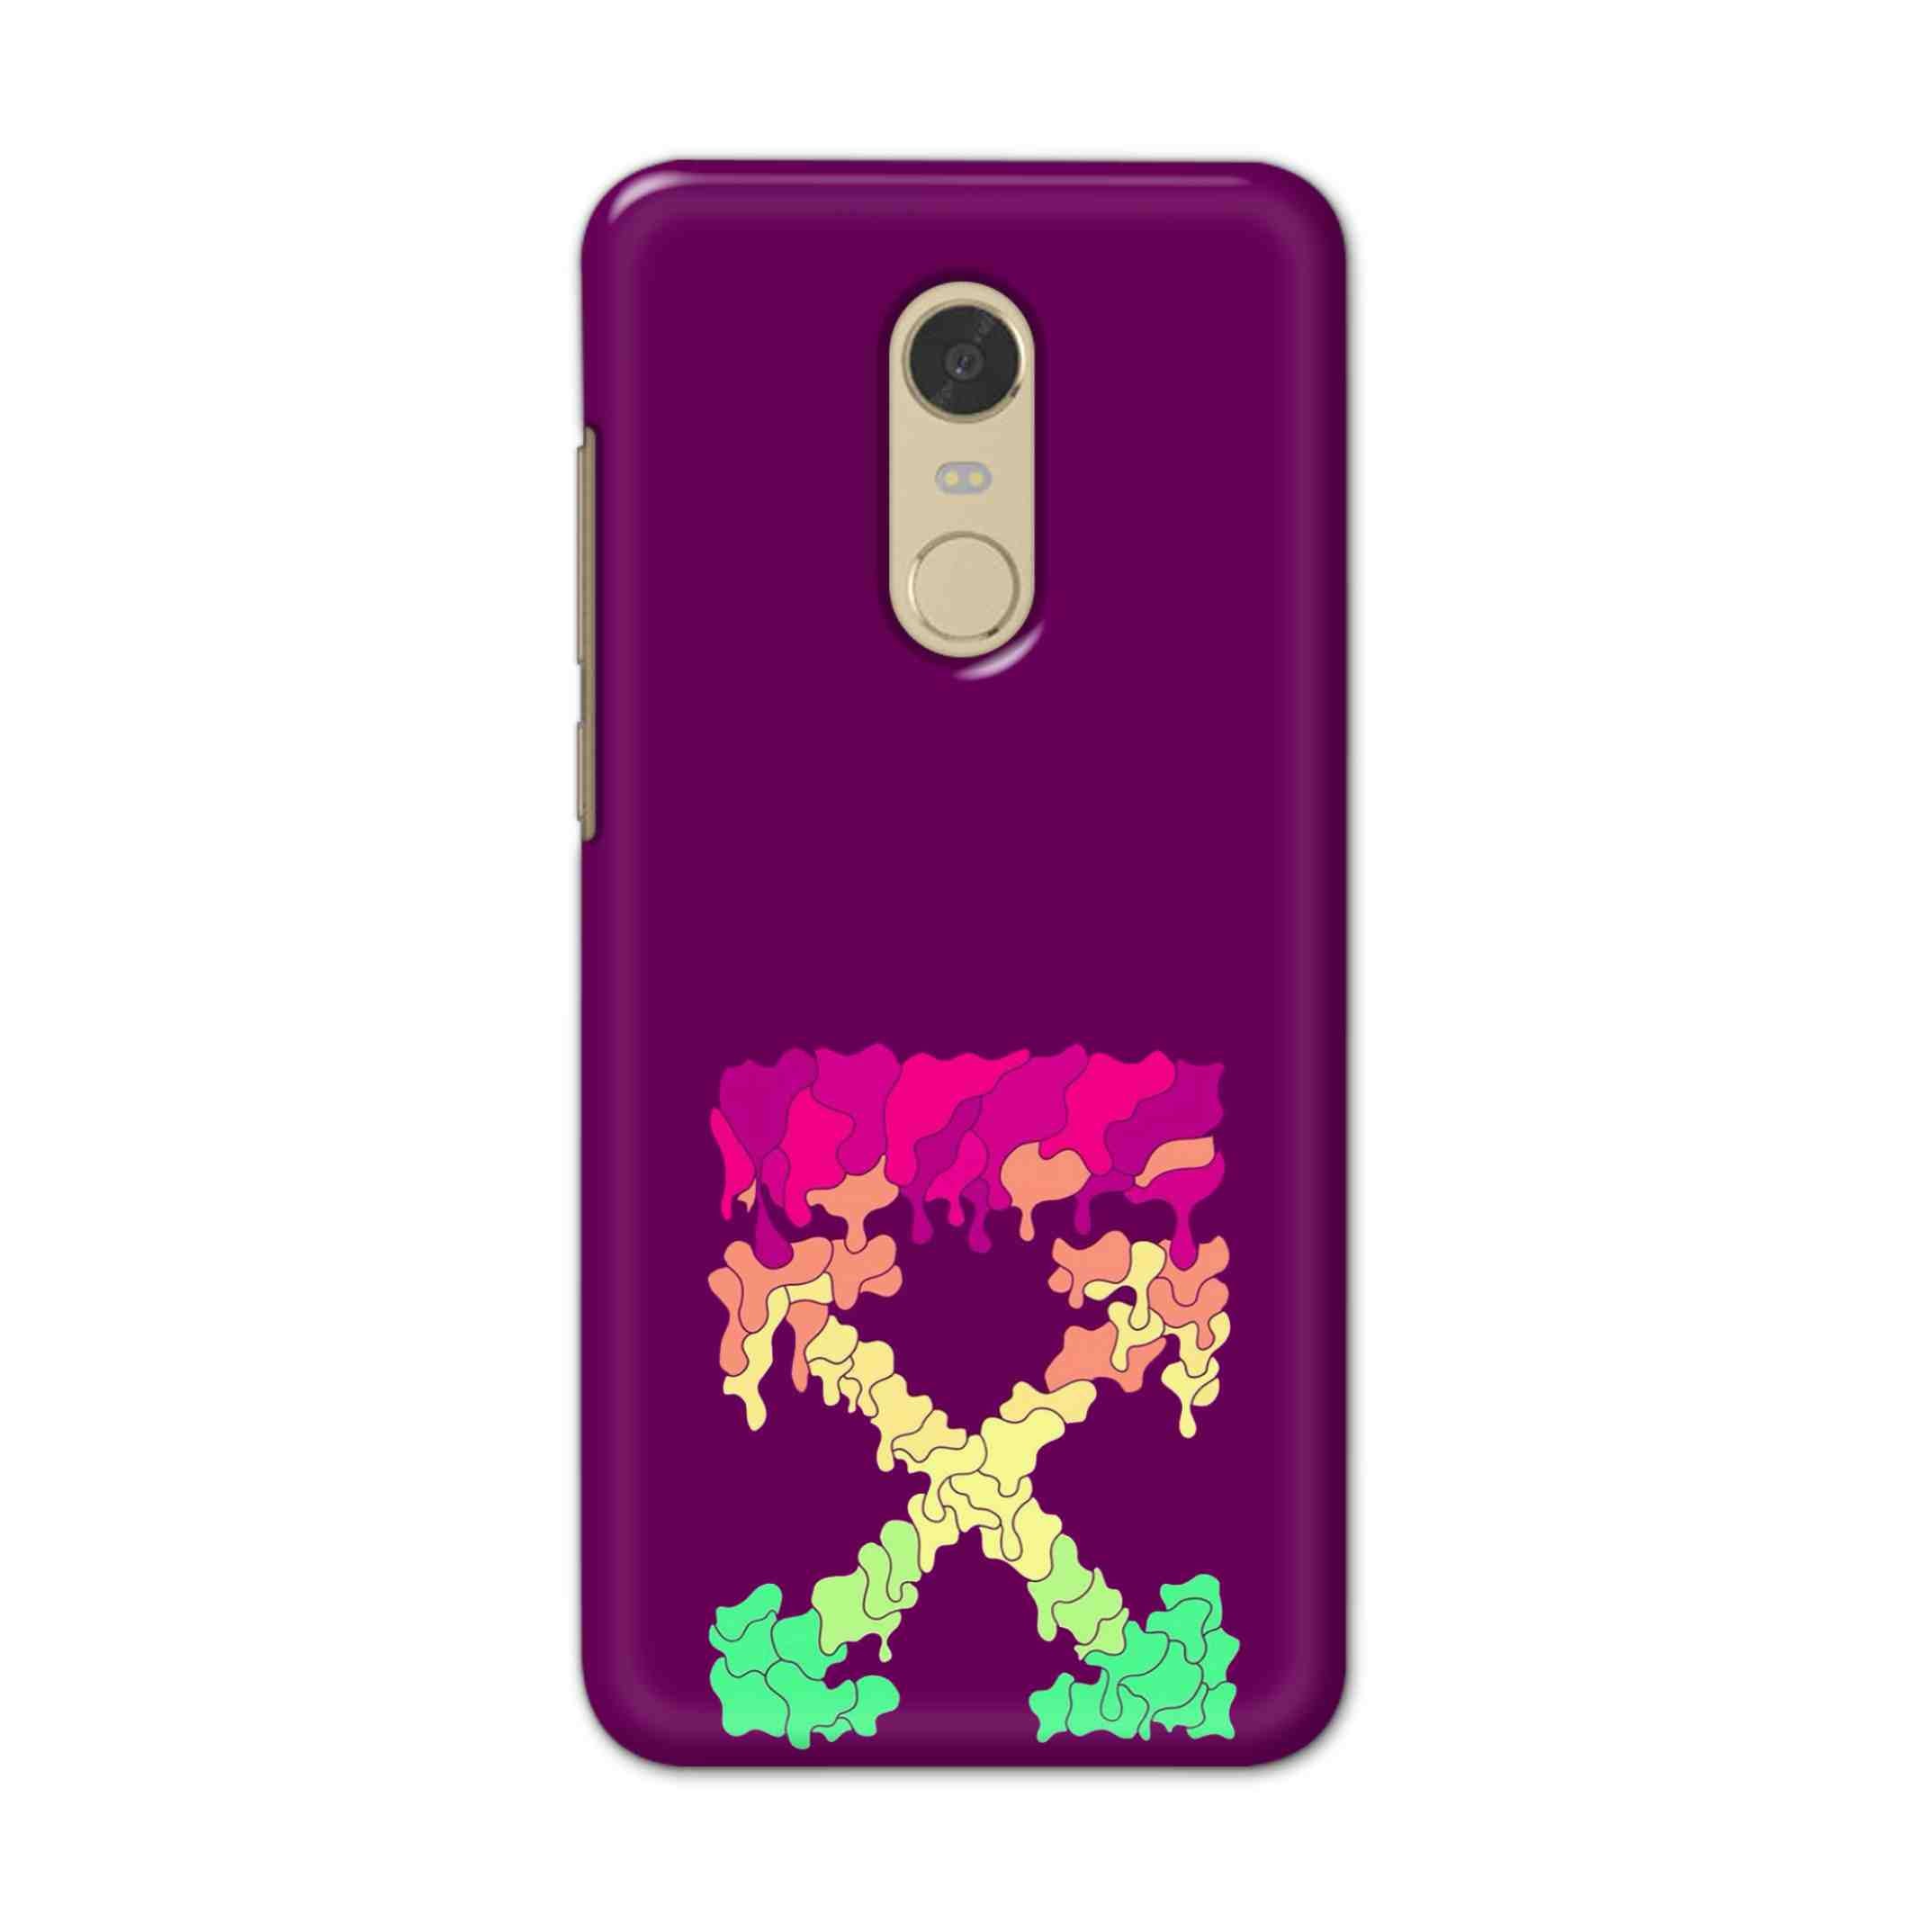 Buy X.O Hard Back Mobile Phone Case/Cover For Redmi Note 6 Online